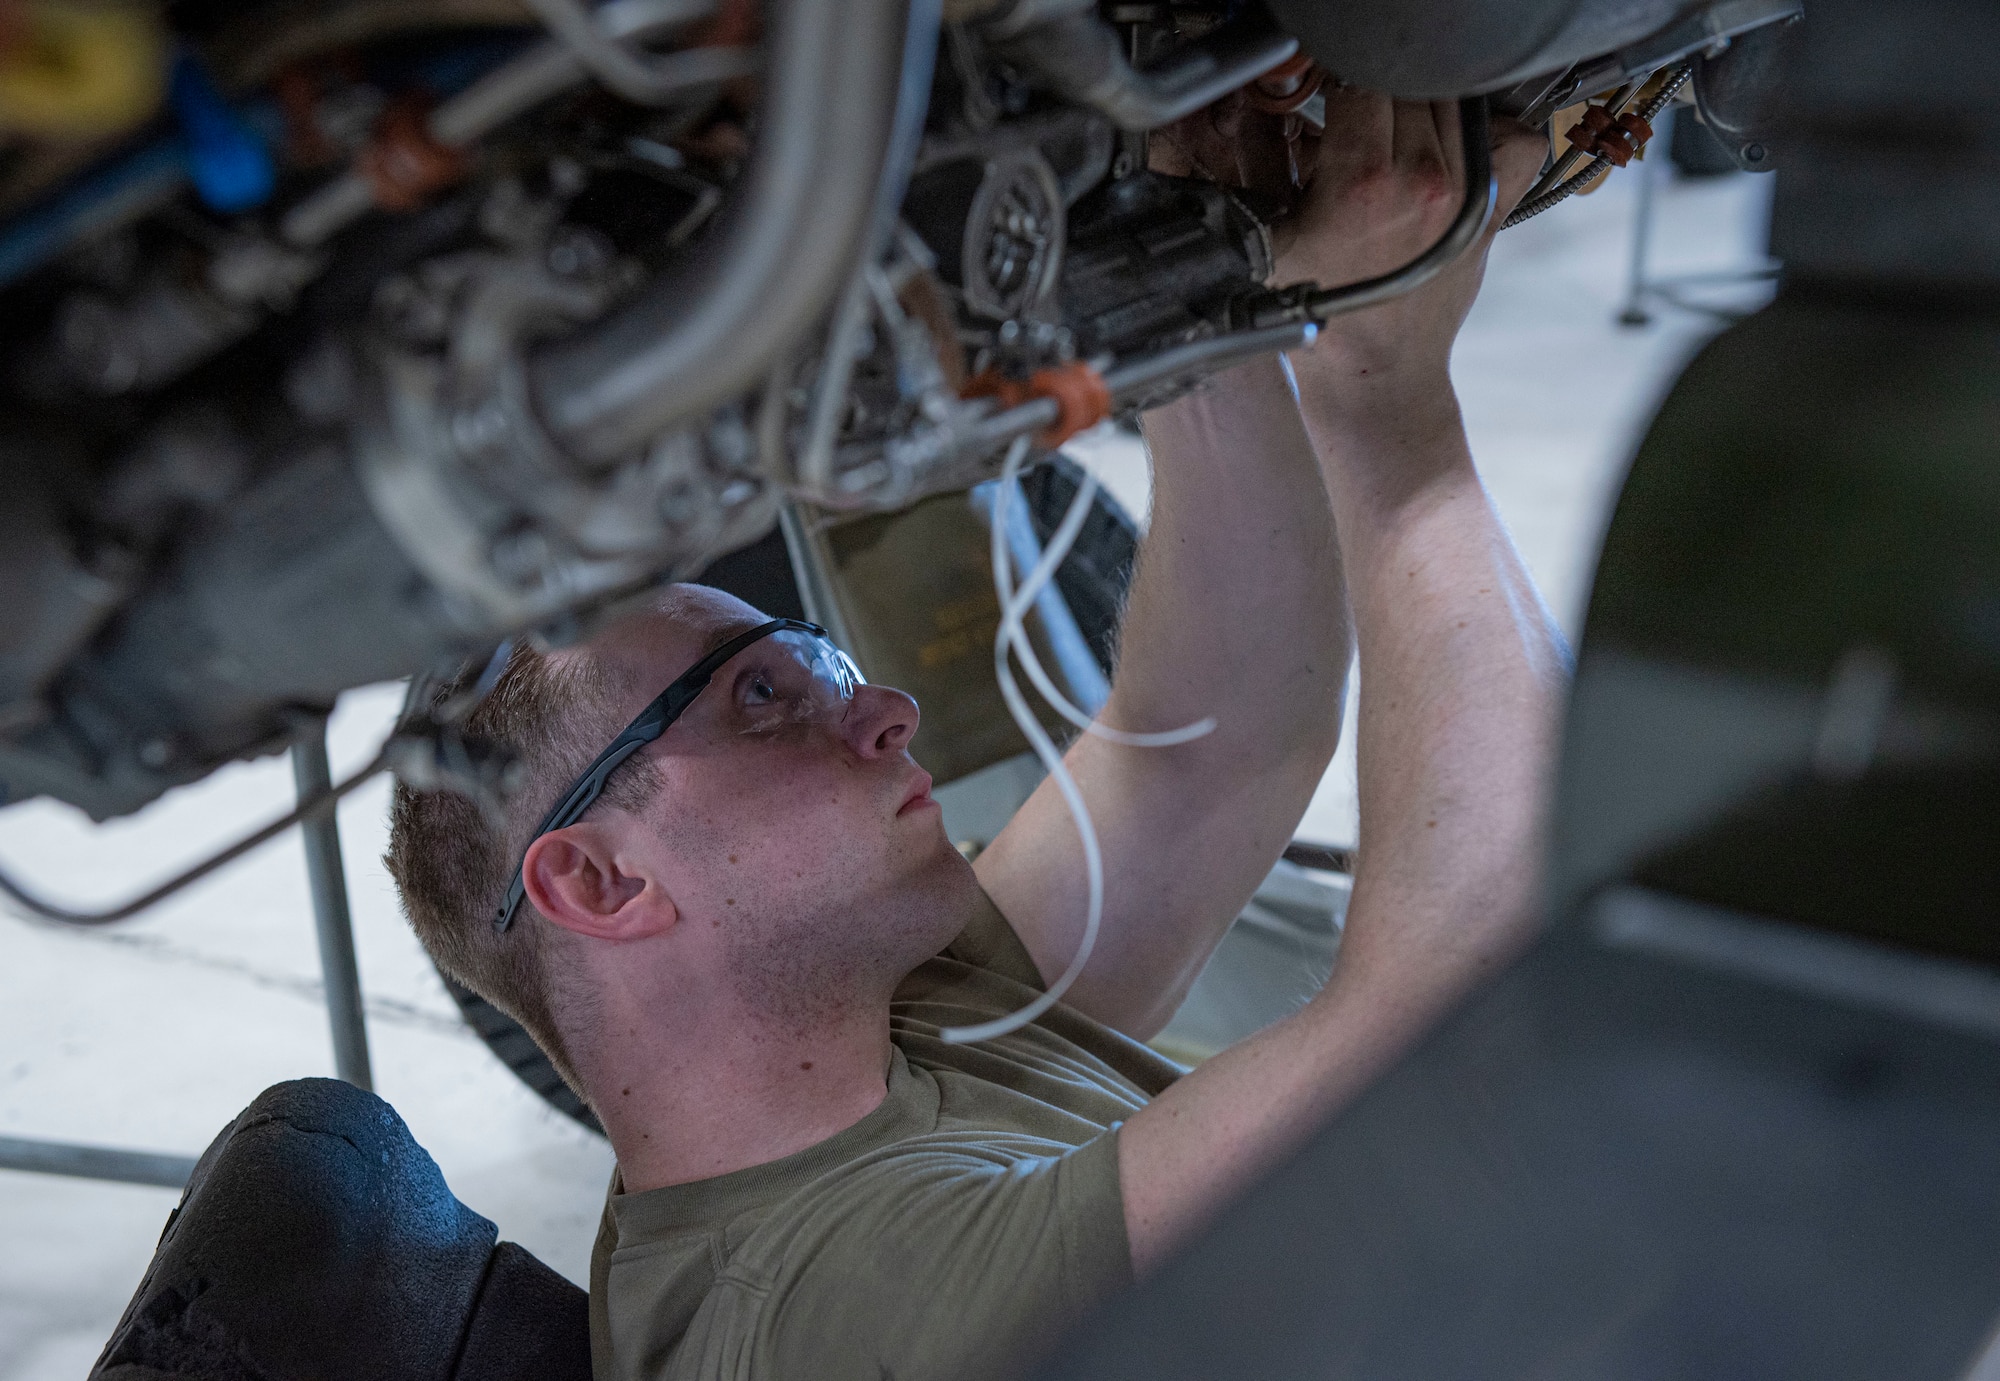 Airman 1st Class Jordan Newberry, 4th Component Maintenance Squadron aerospace propulsion apprentice, checks the engine of an F-15E Strike Eagle at Seymour Johnson Air Force Base, North Carolina, April 7, 2022. Aerospace propulsion Airmen are responsible for ensuring all of the 4th Fighter Wing’s F-15 engines are tested, properly maintained and repaired as needed.  (U.S. Air Force photo by Airman 1st Class Sabrina Fuller)